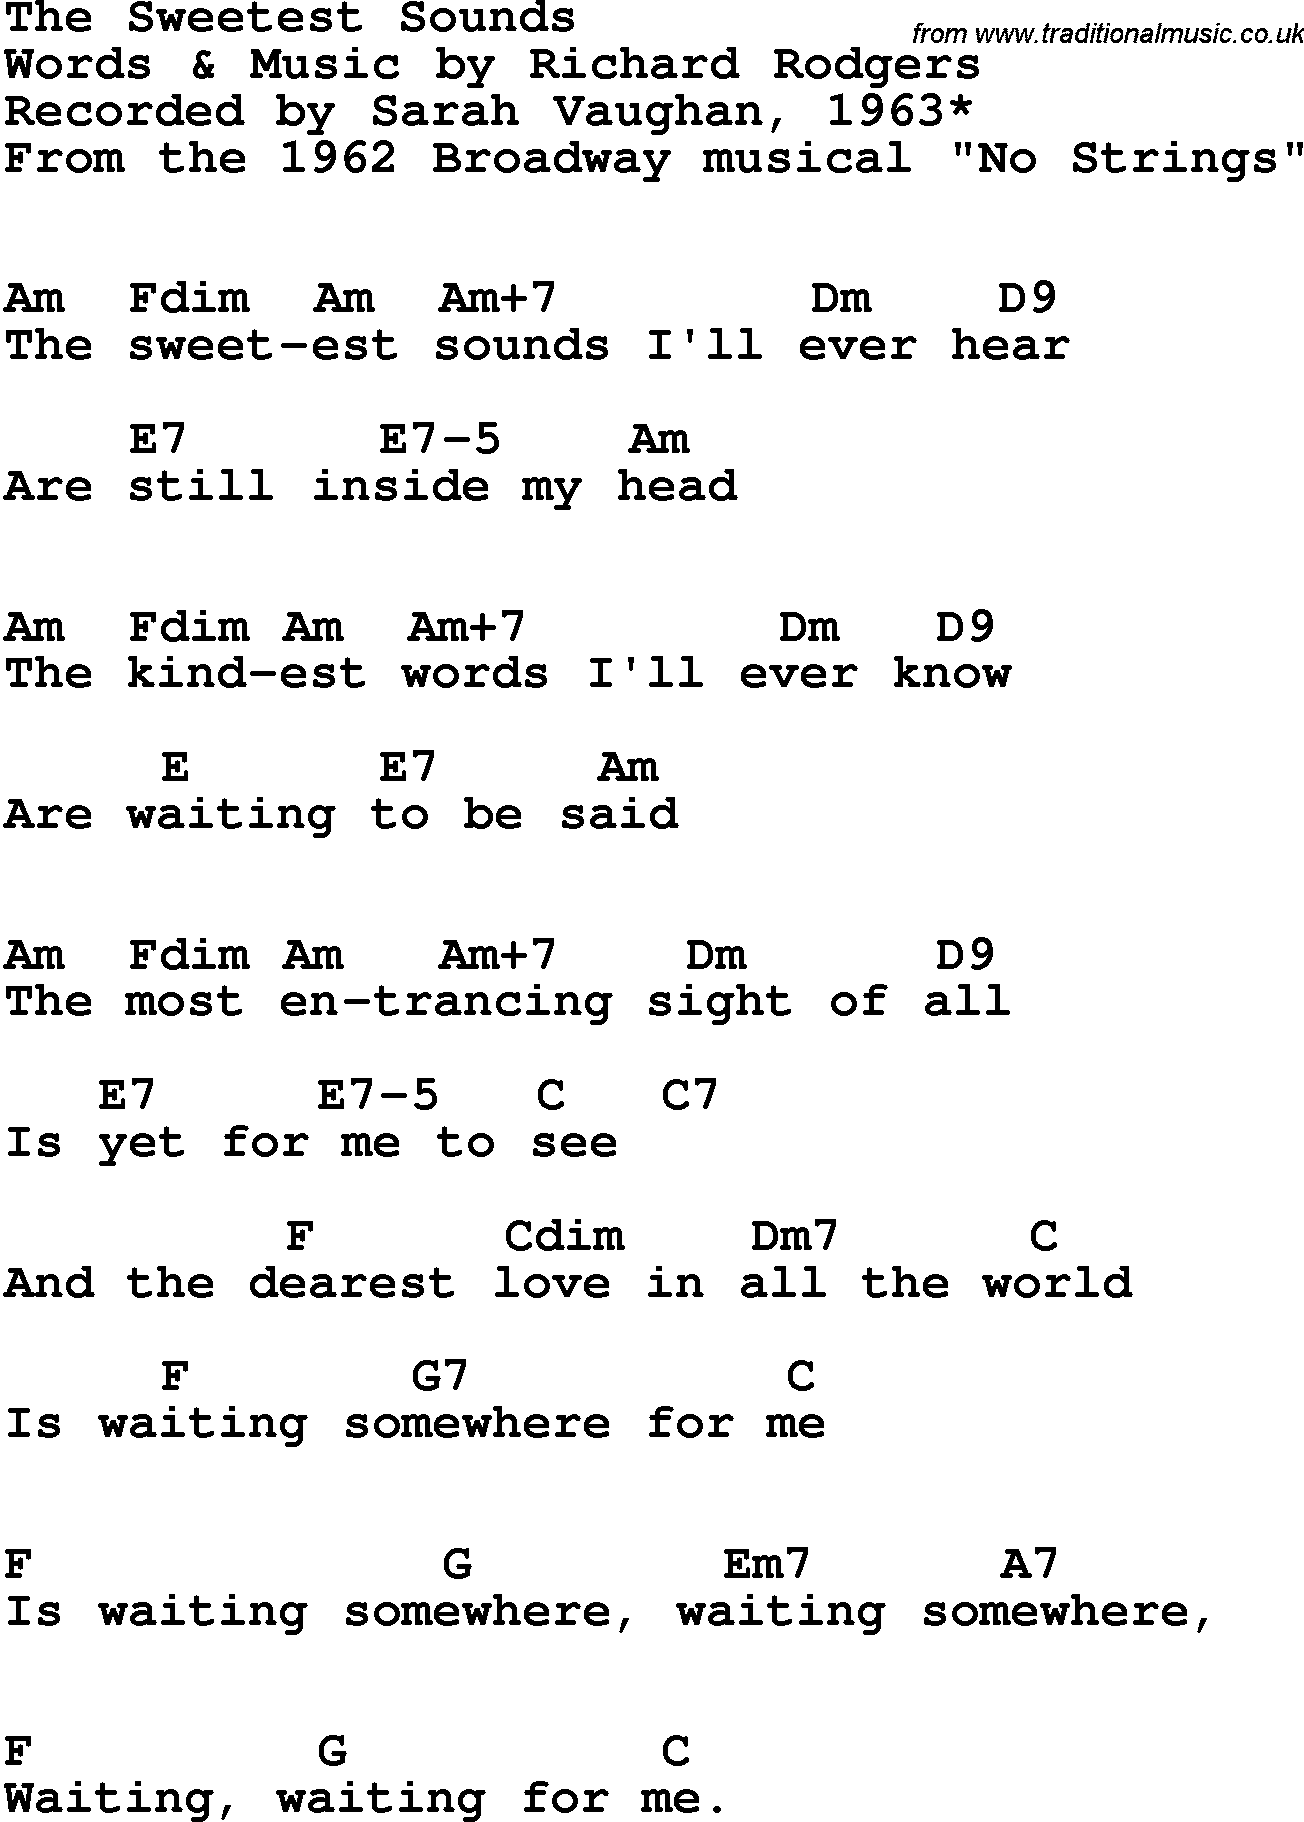 Song Lyrics with guitar chords for Sweetest Sounds, The - Sarah Vaughan, 1963